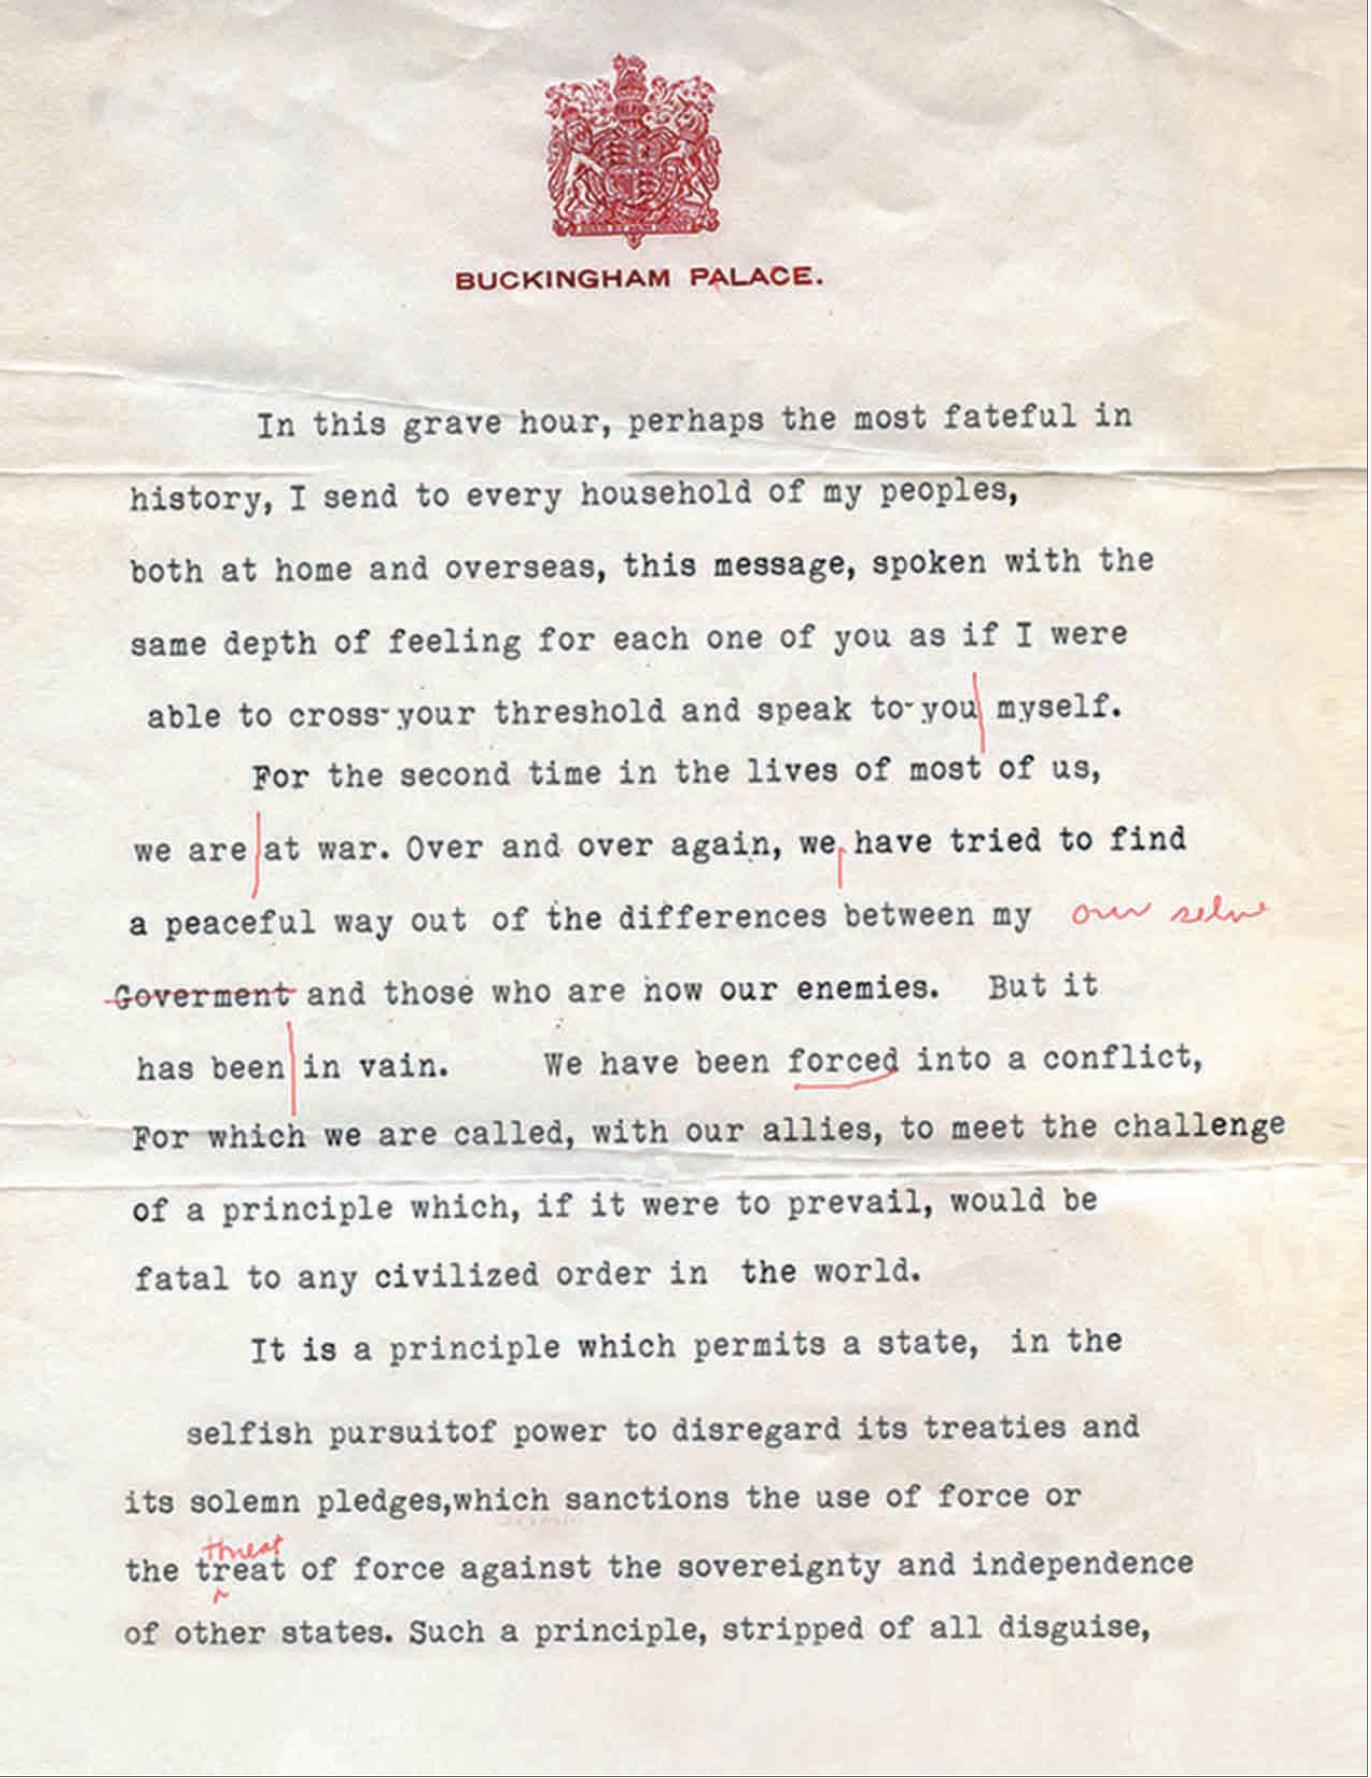 Typed script of the radio address King George VI of the United Kingdom delivered announcing Britain’s entry into the war with Germany, Buckingham Palace, London, England, UK, Sept 3, 1939. Page 1 of 2.